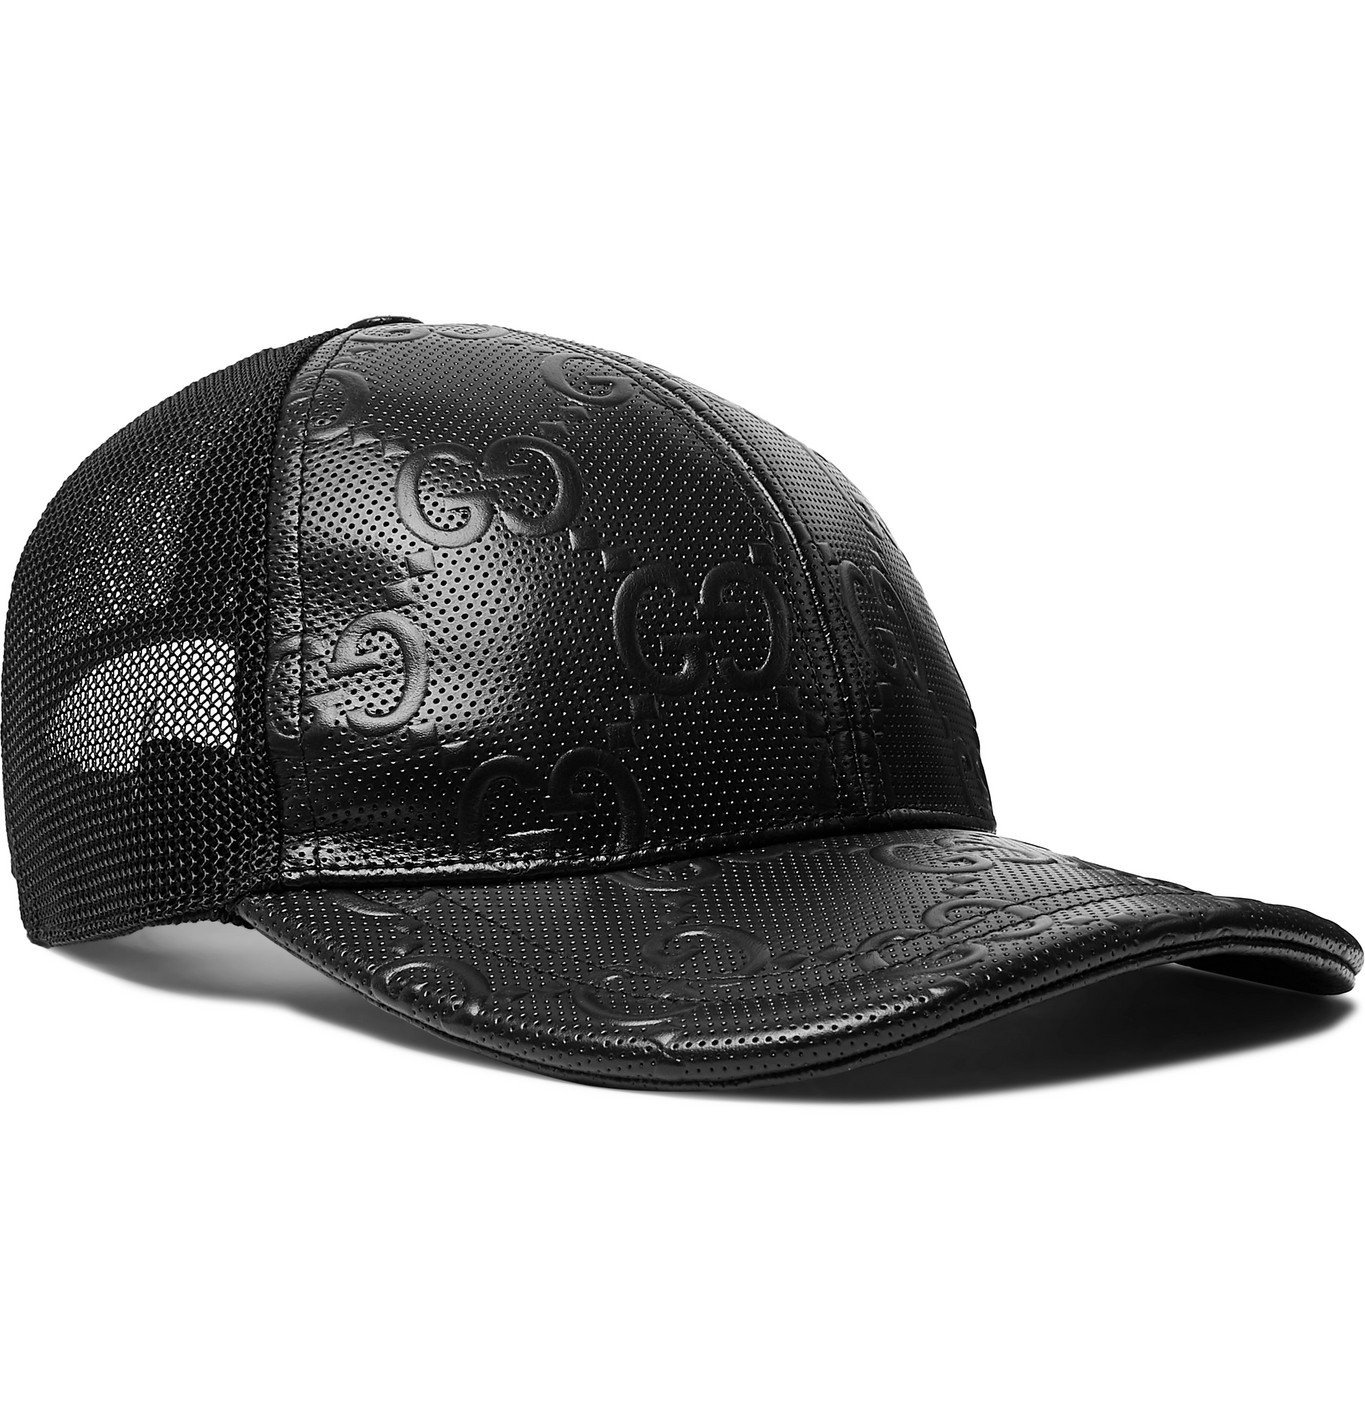 Gucci - Logo-Embossed Leather and Mesh Baseball Cap - Black Gucci